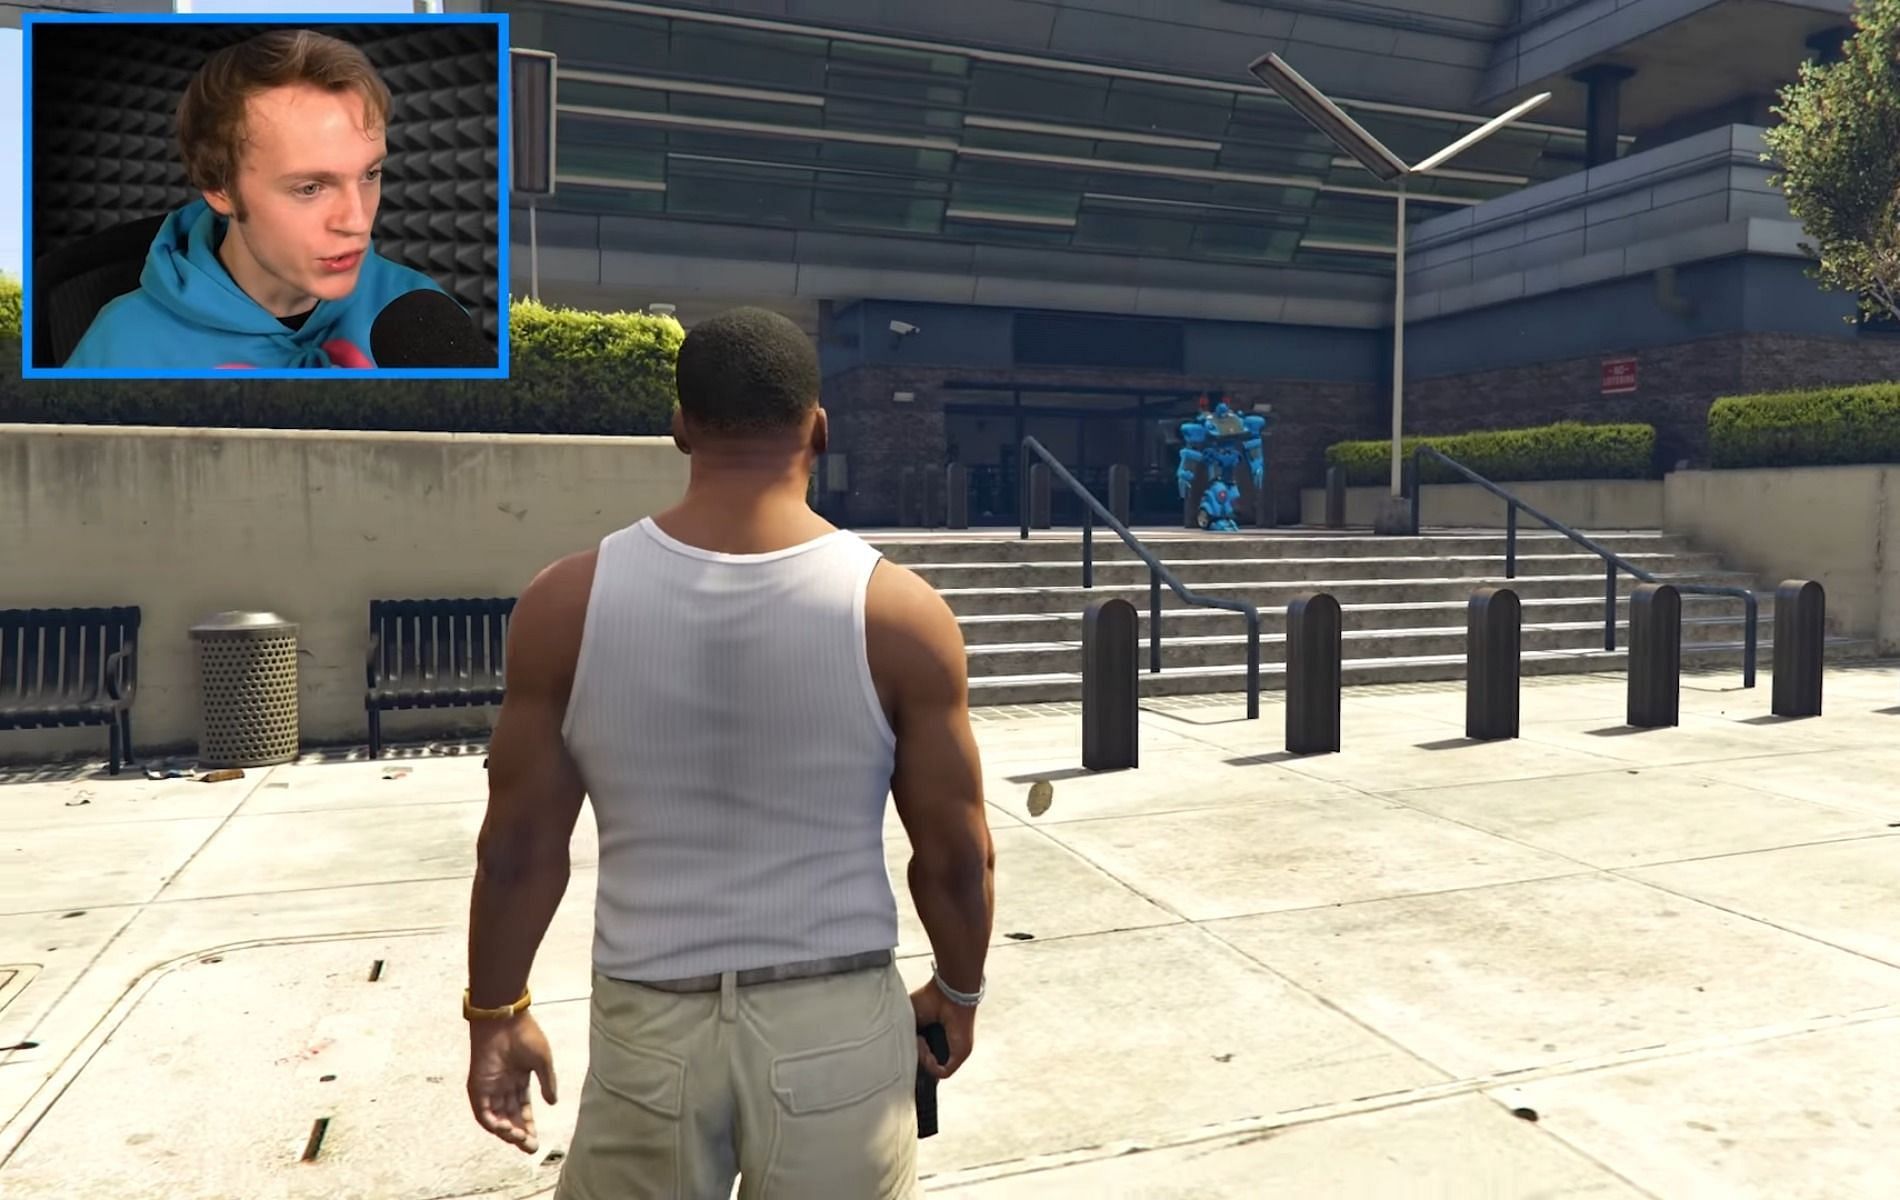 A Transformer in GTA 5 added as an NPC using mods (Image via Nought, YouTube)